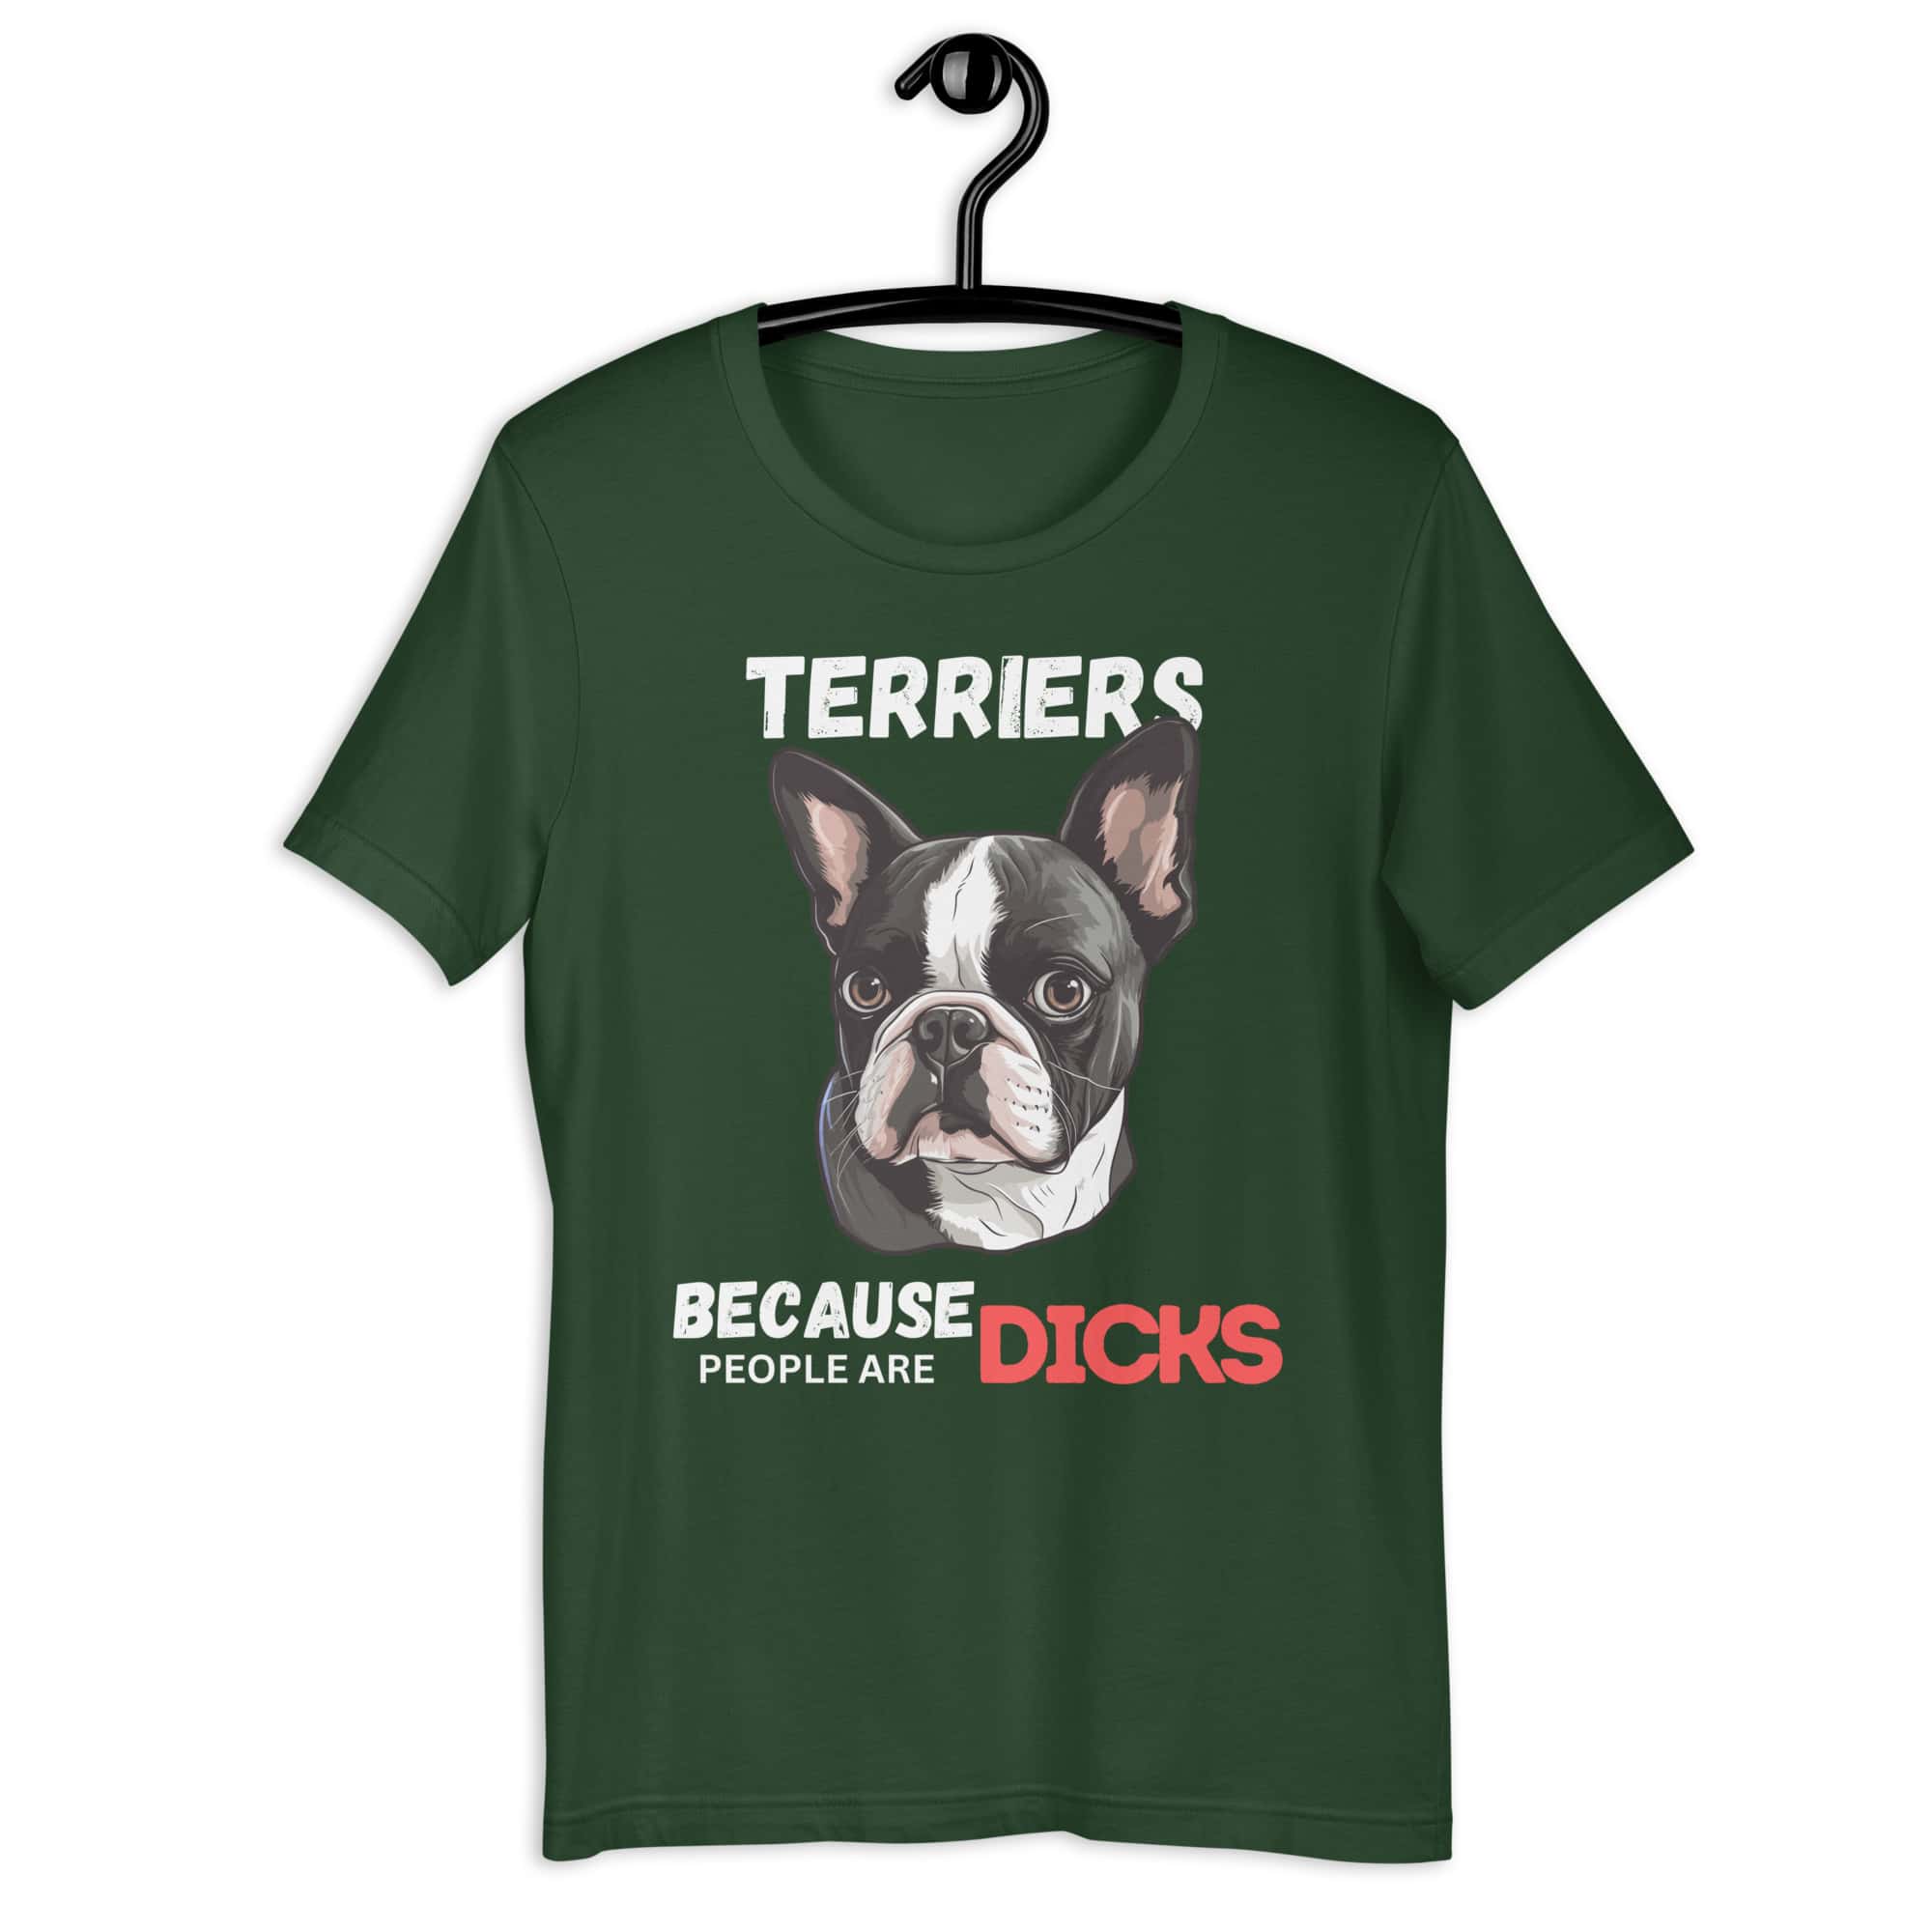 Terriers Because People Are Dicks Unisex T-Shirt Dark green